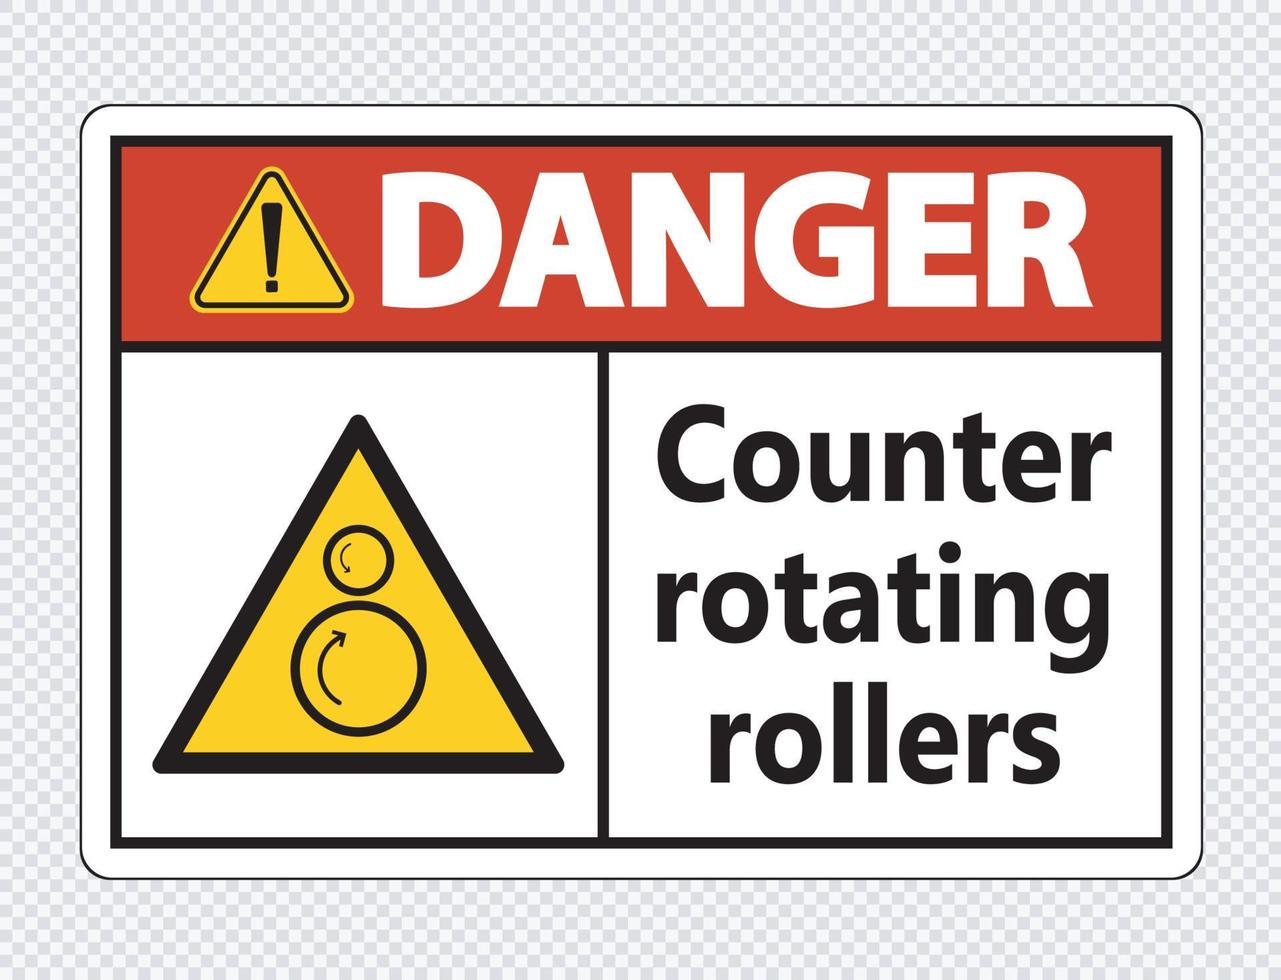 Danger counter rotating rollers sign on transparent background vector